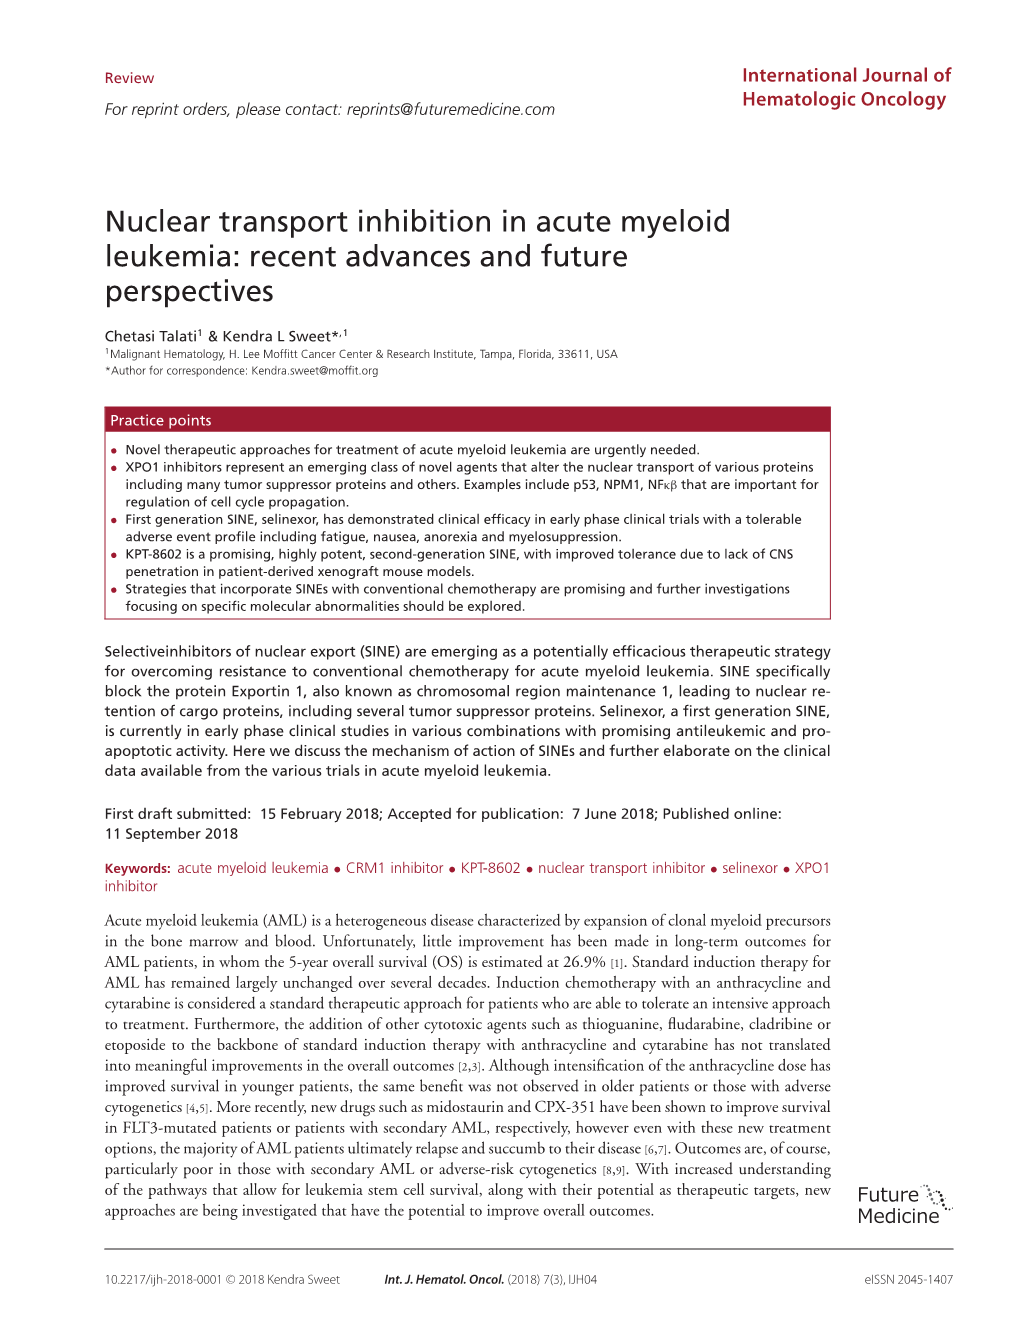 Nuclear Transport Inhibition in Acute Myeloid Leukemia: Recent Advances and Future Perspectives